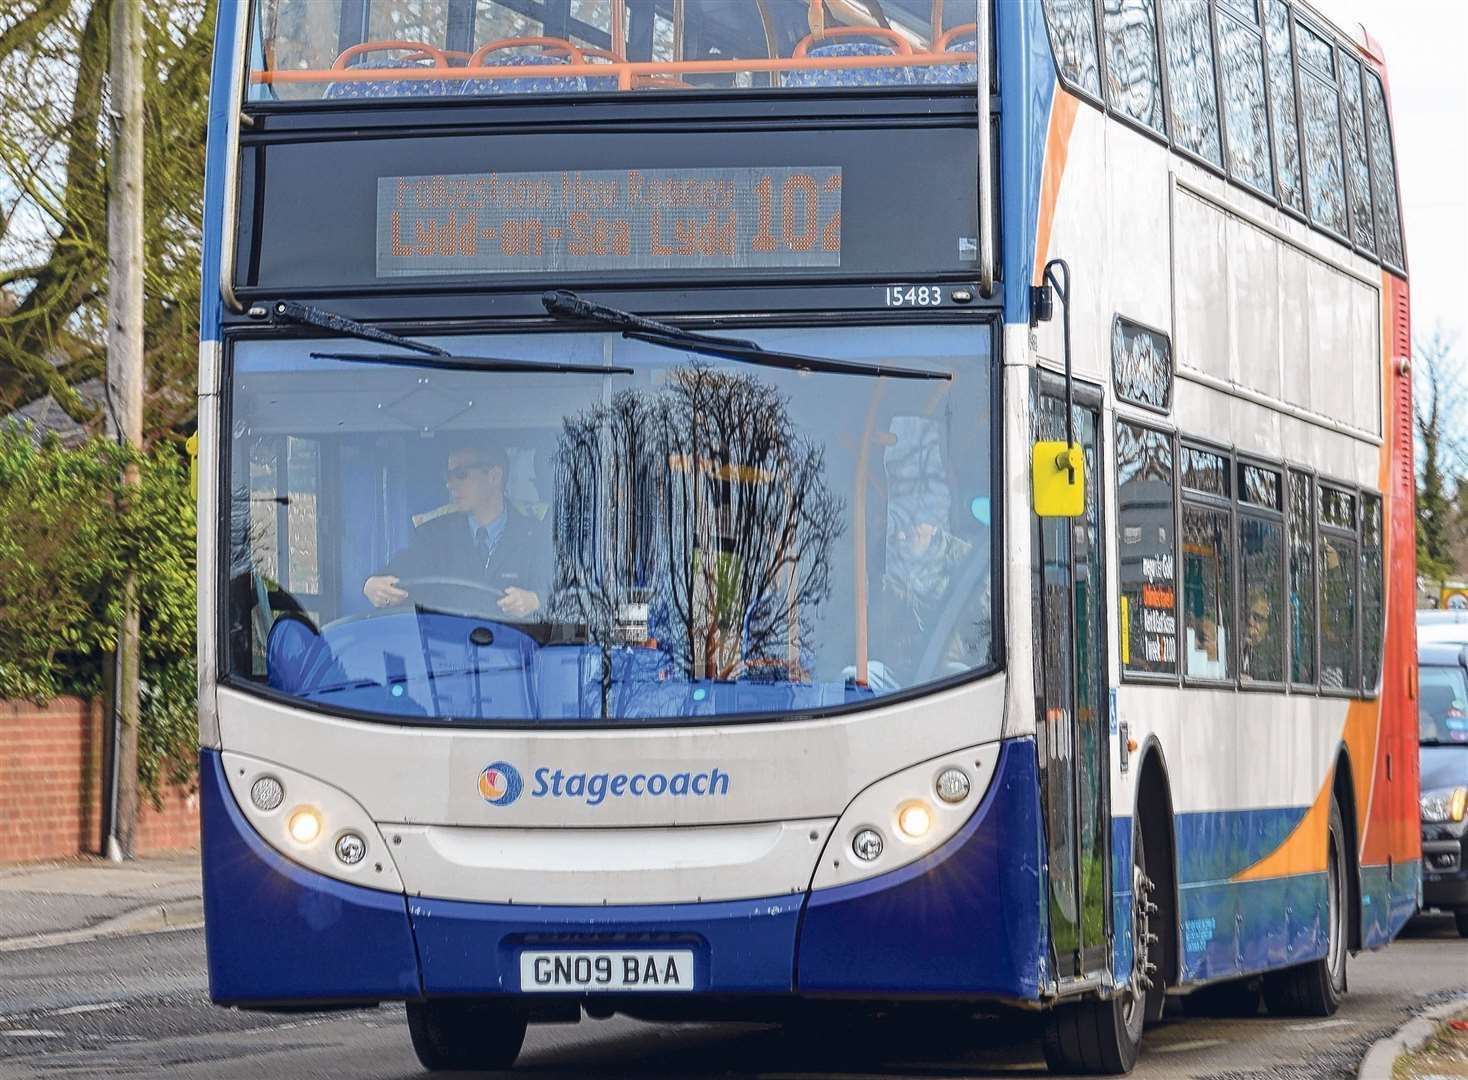 Stagecoach operates services across Kent